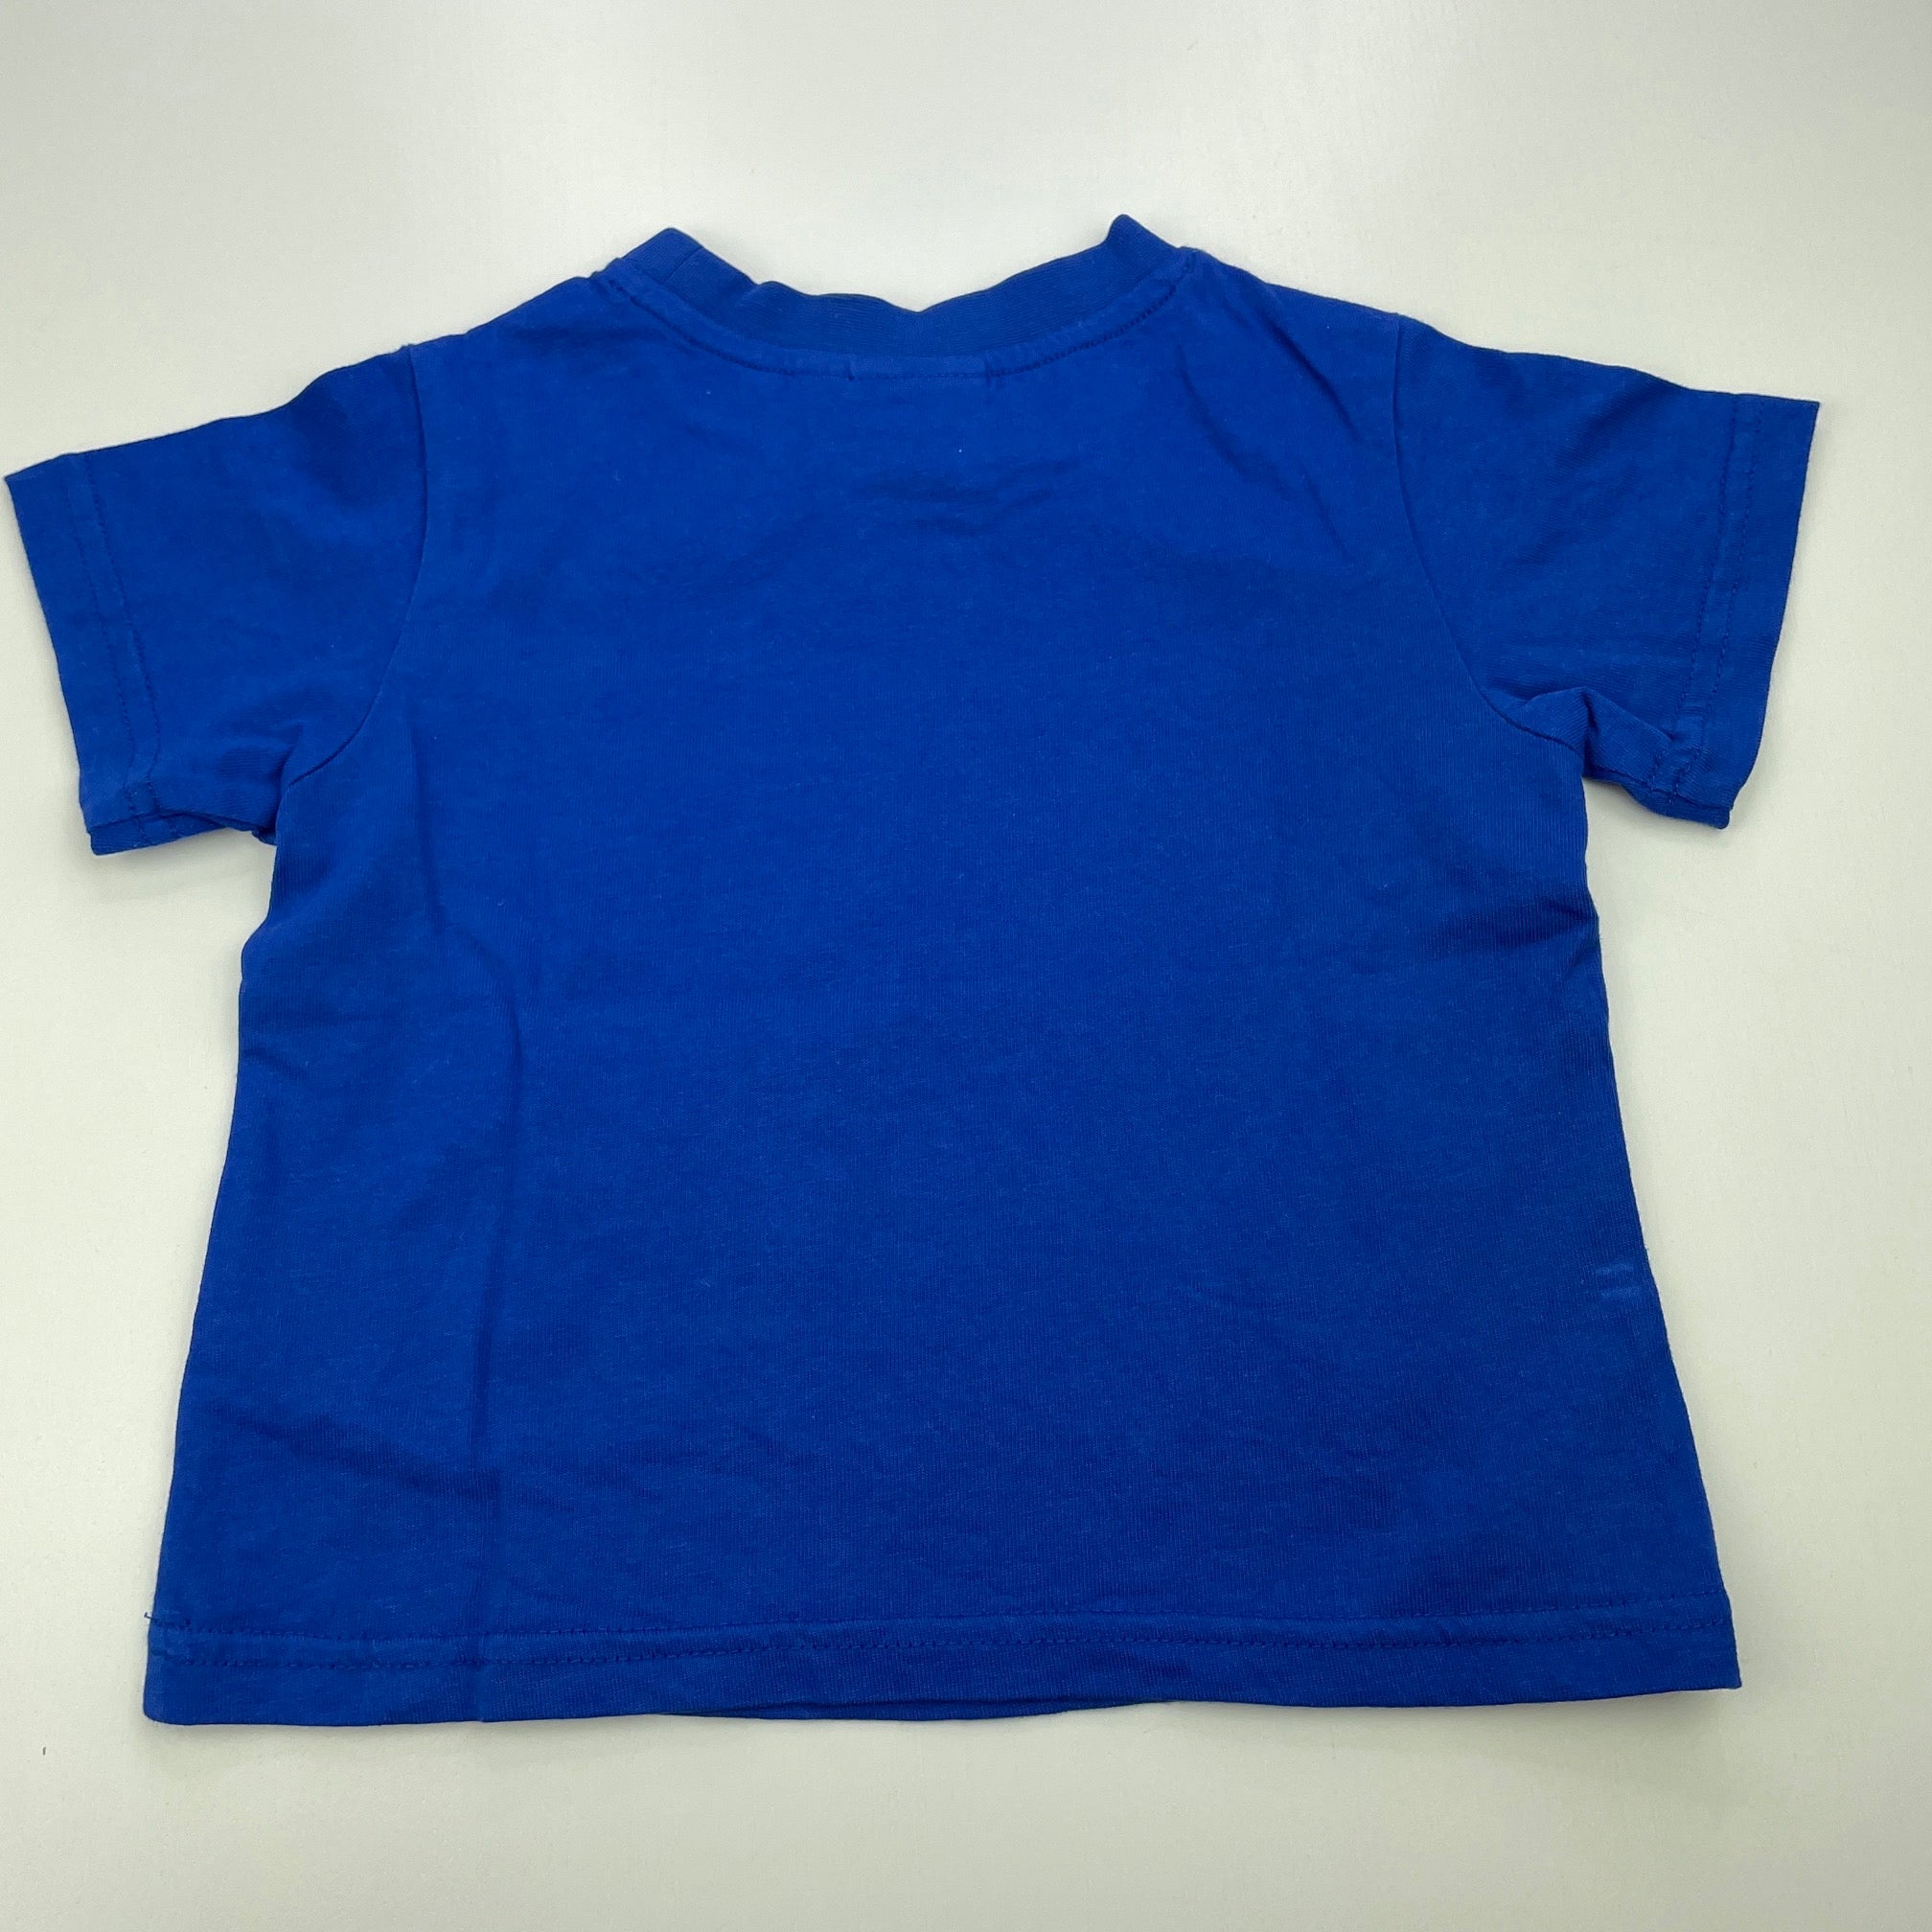 Majestic Athletic Kids' Top - Blue